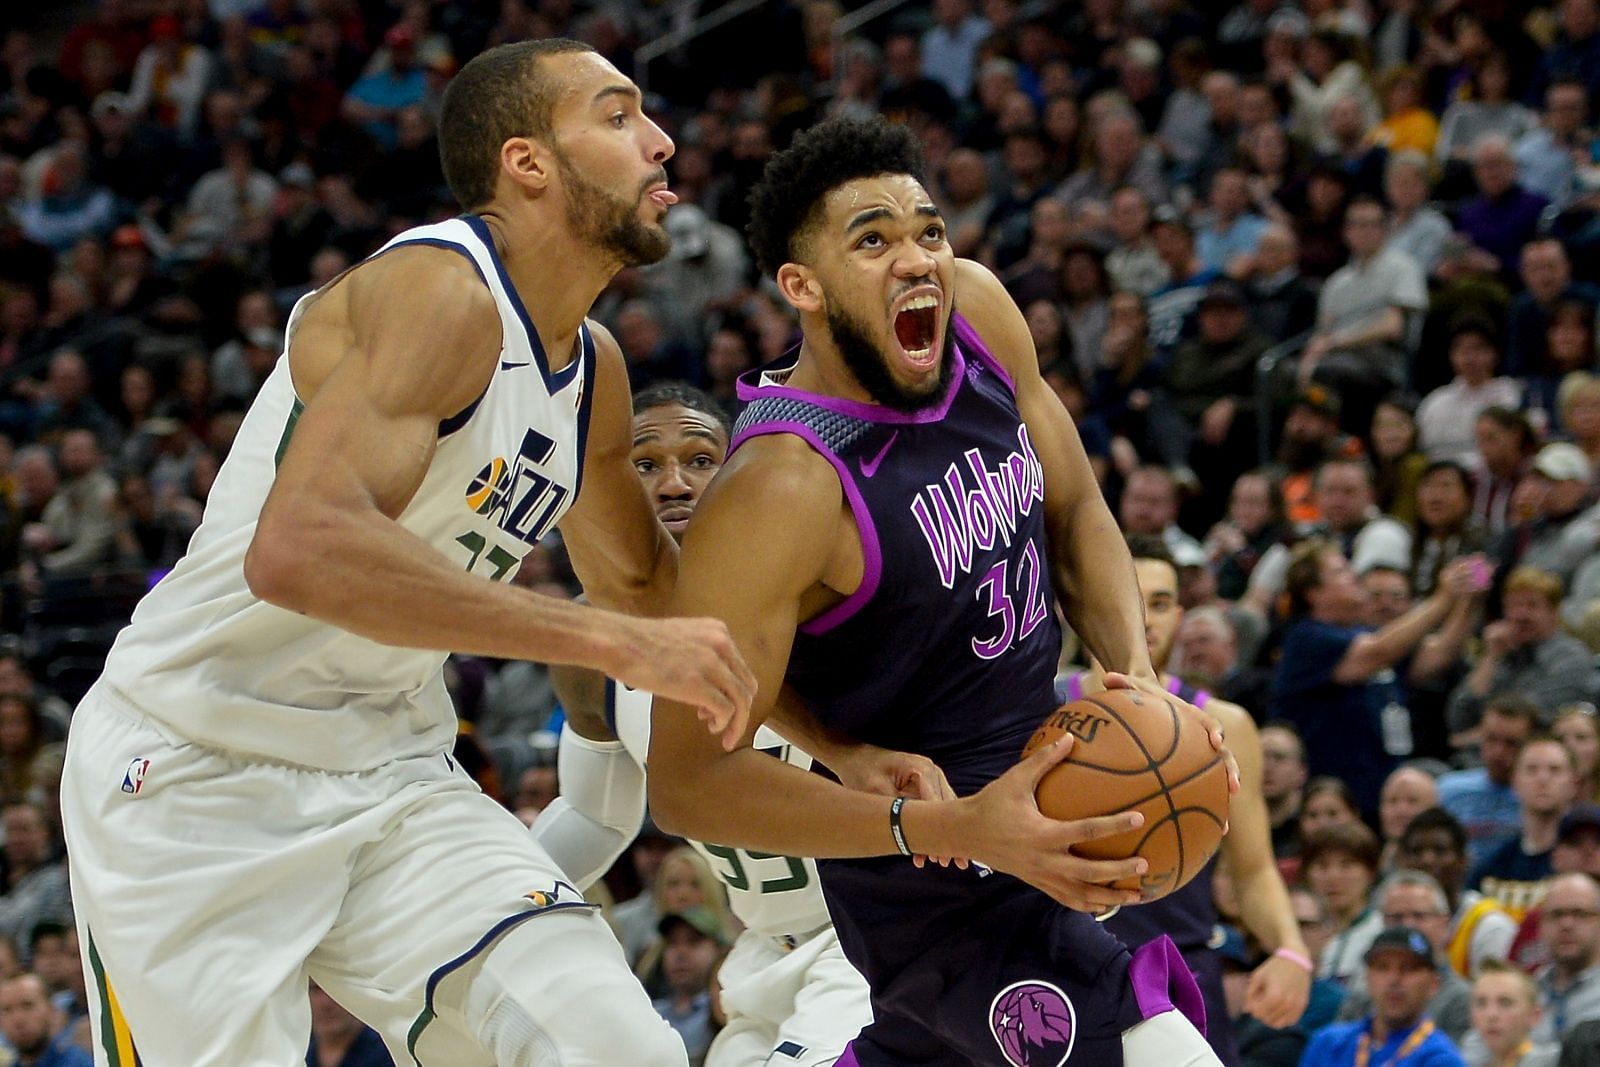 Karl-Anthony Towns of the Minnesota Timberwolves against Rudy Gobert of the Utah Jazz